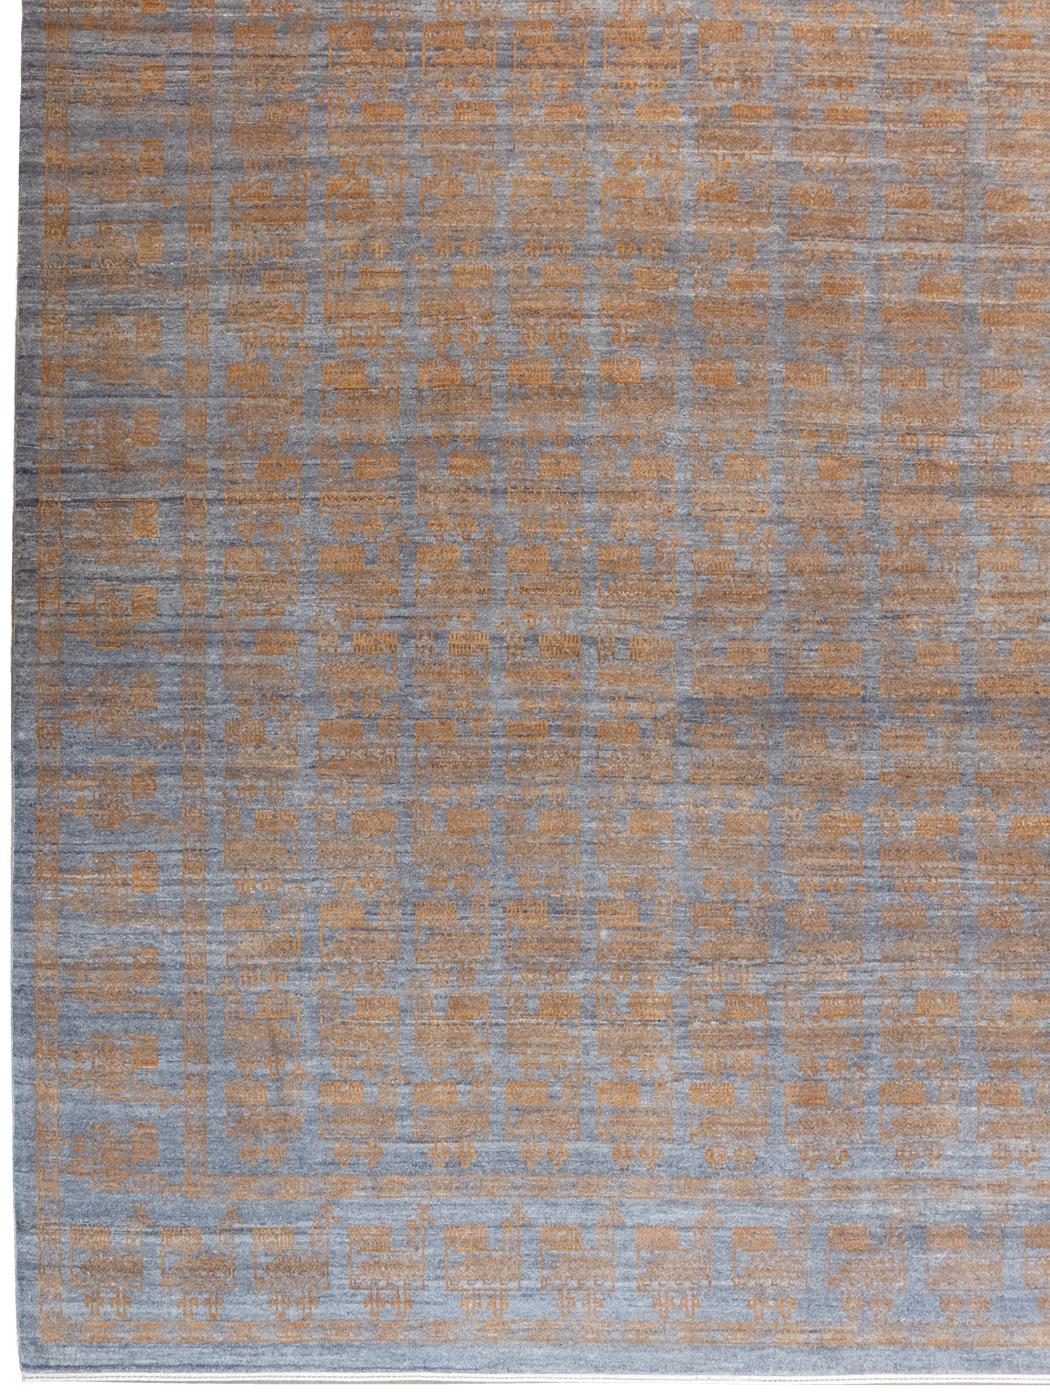 Modern Orley Shabahang, Orange and Gray Contemporary Peacock Carpet, Wool, 9' x 12' For Sale